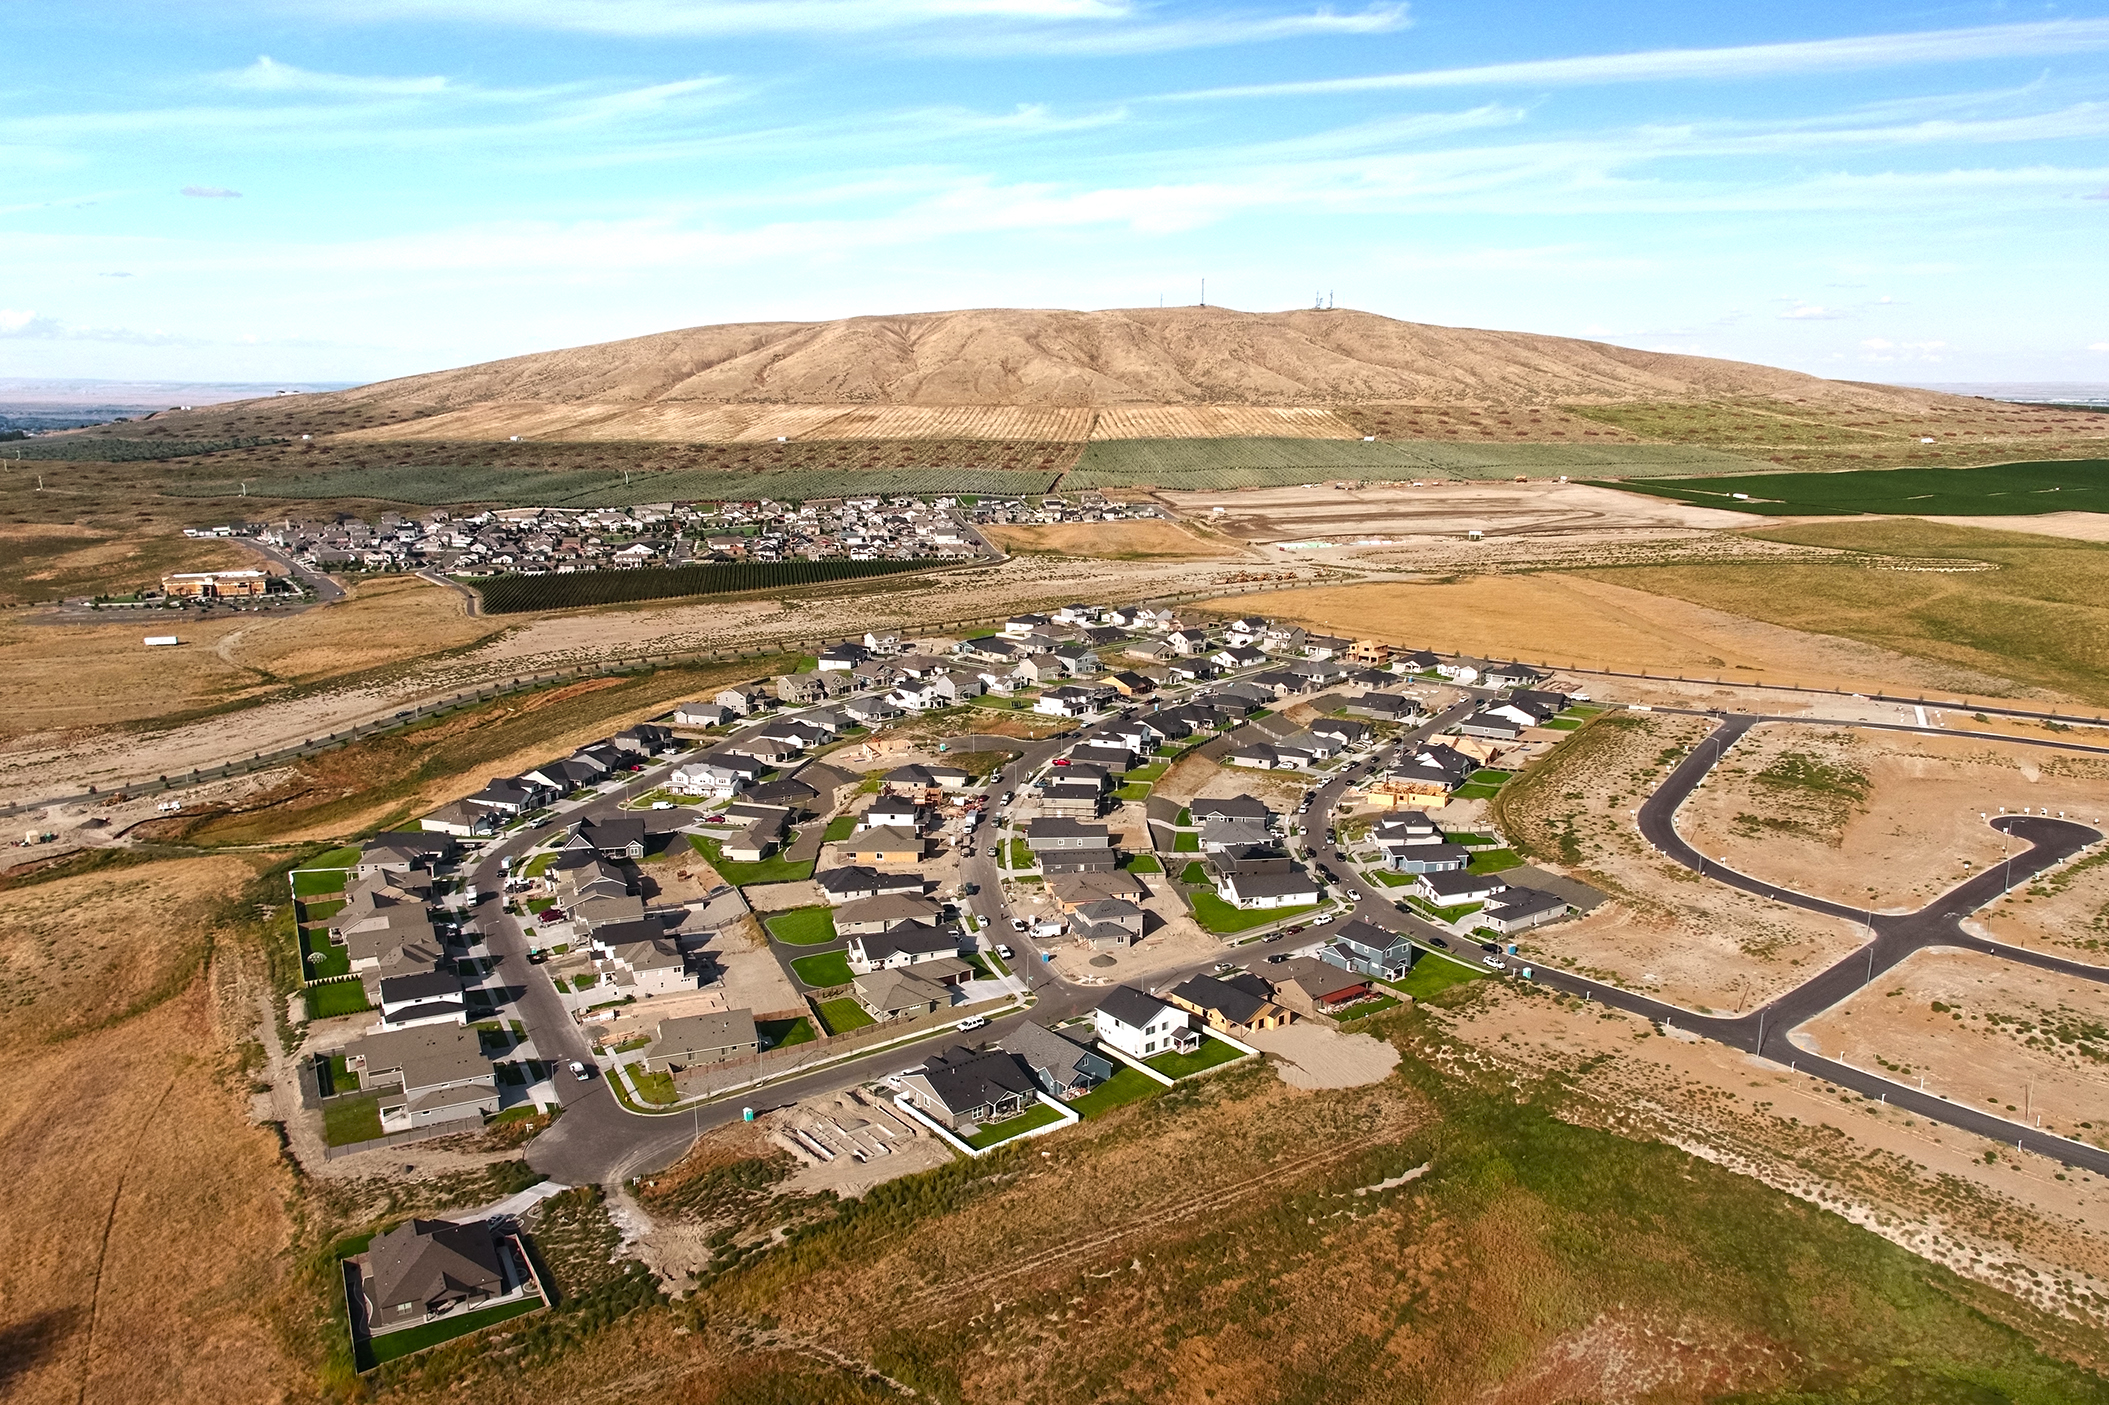 Badger Mountain South development off Dallas Road in Richland. (Photo by UpAngle)